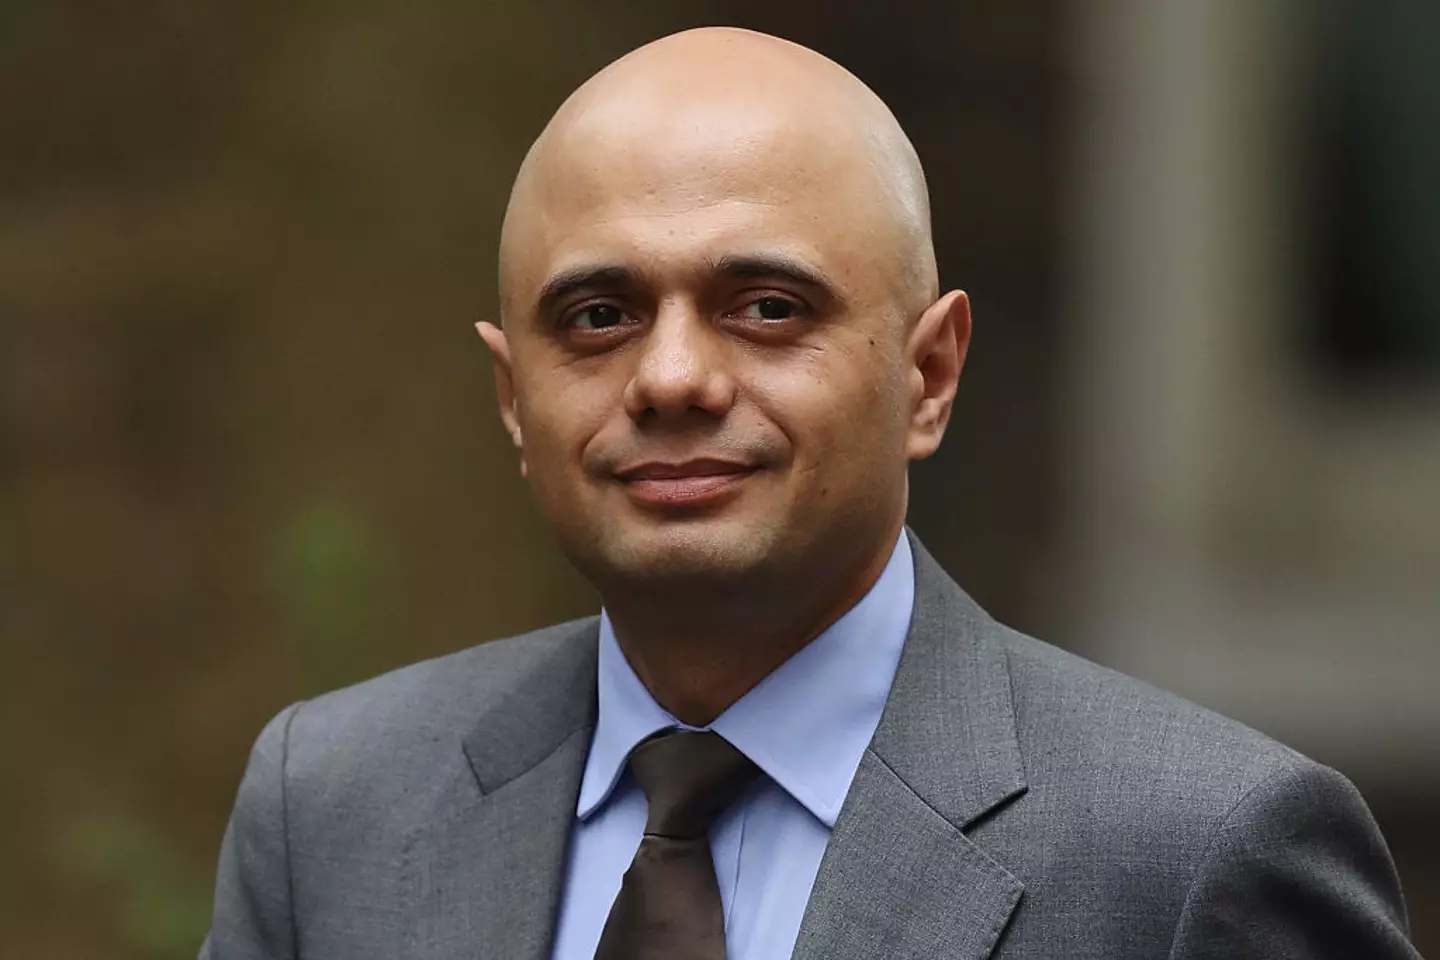 Former Cabinet minister Sajid Javid has been knighted for his political and public services.